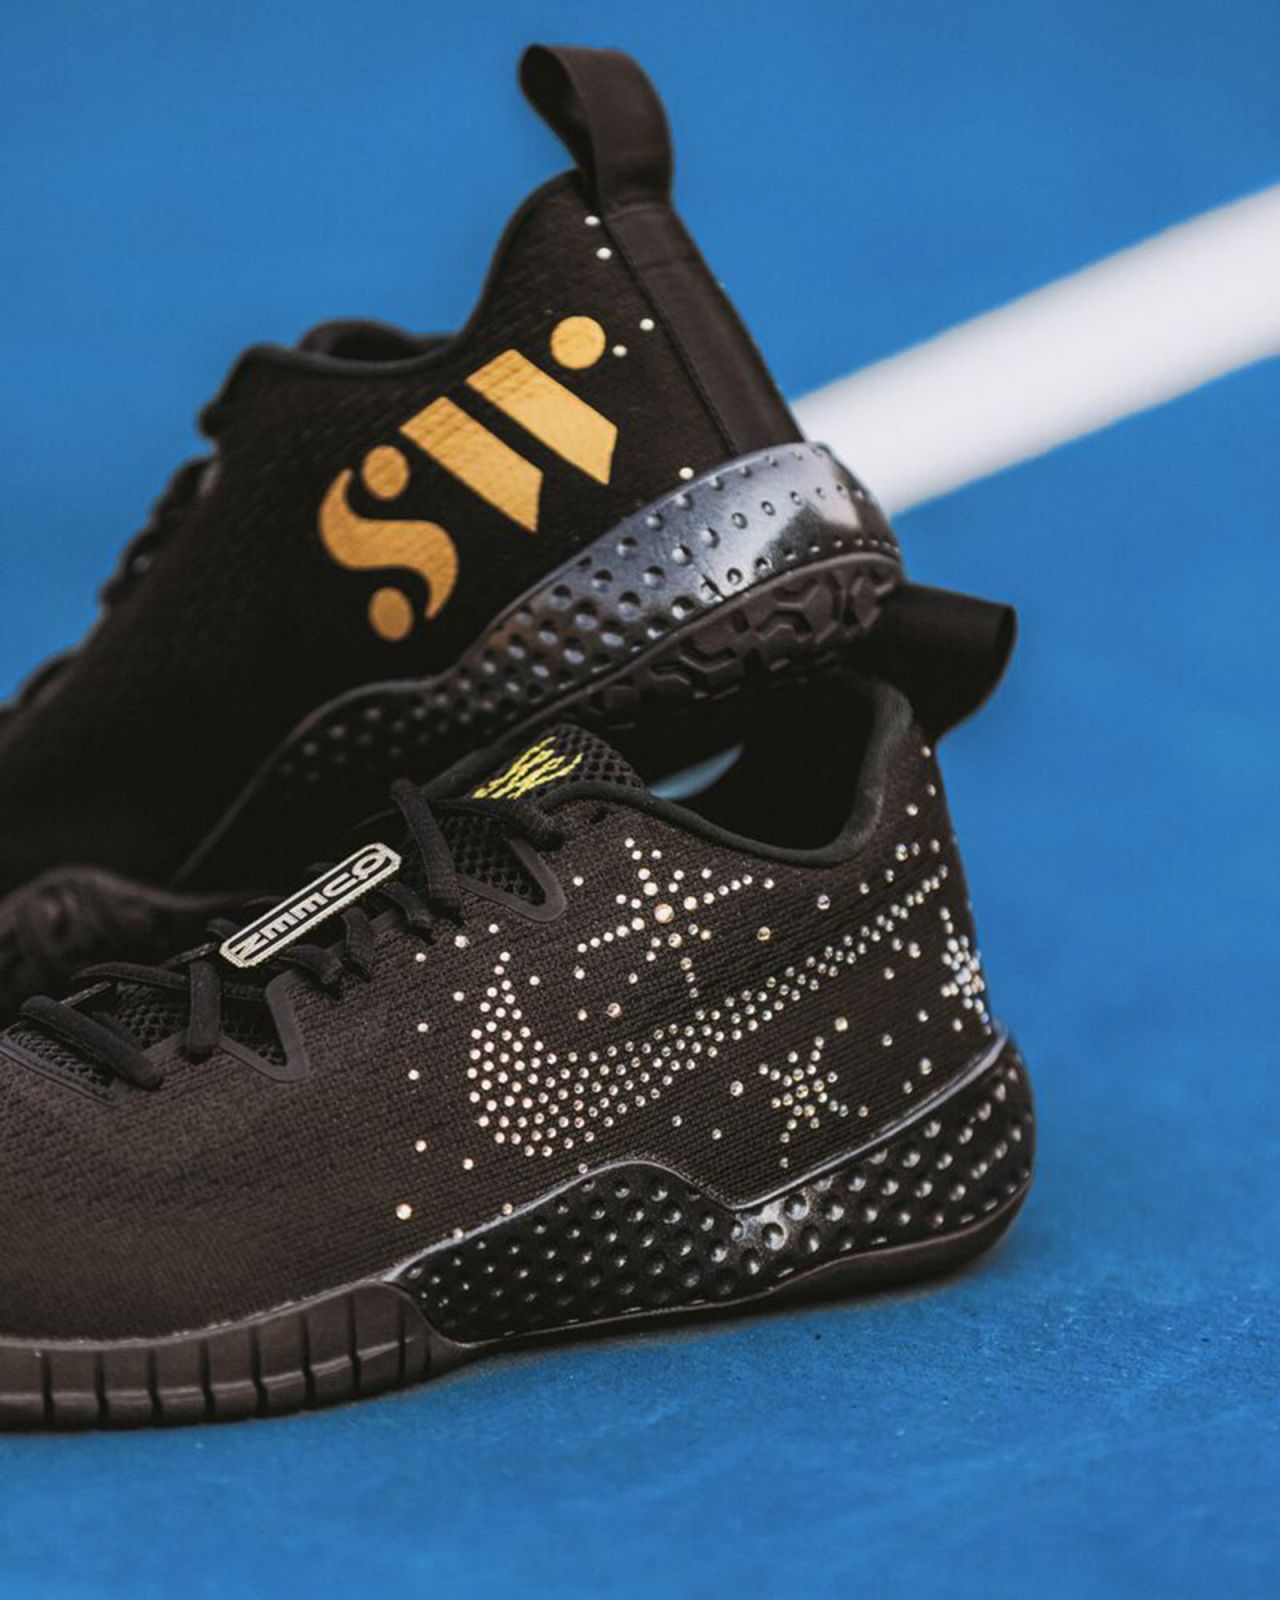 The Nike Swoosh logo on Williams's custom-made sneakers is encrusted with diamonds.